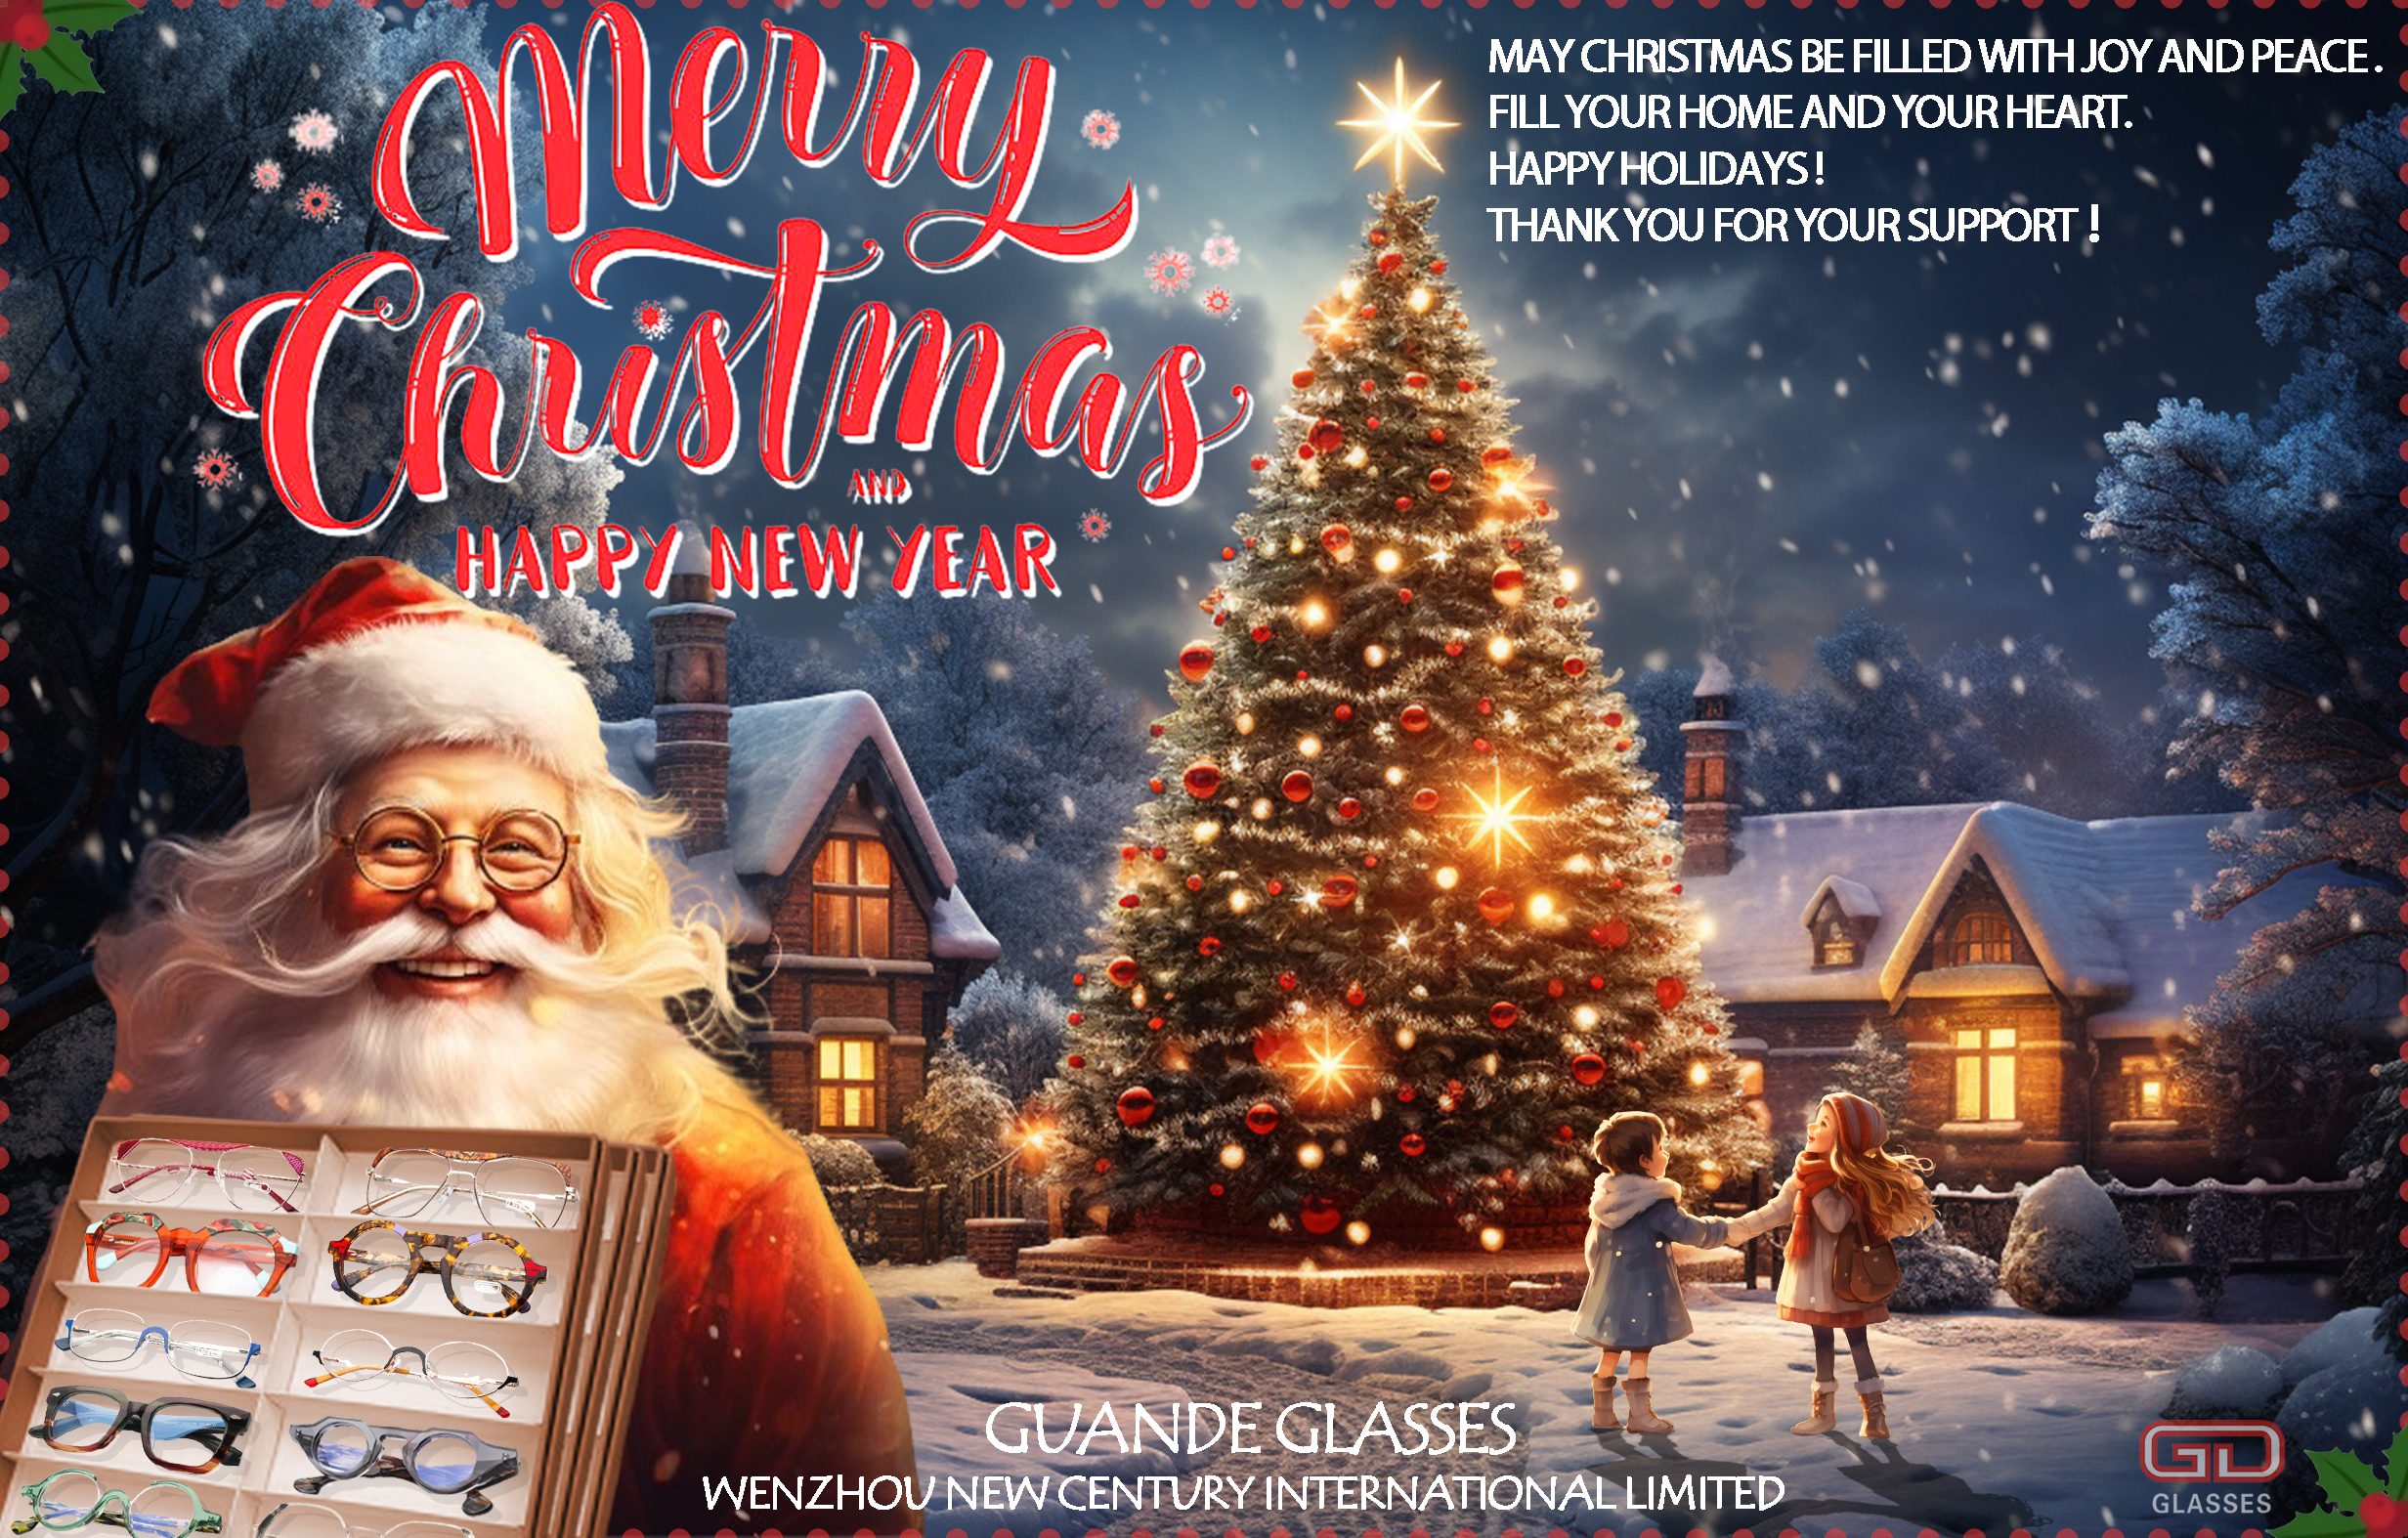 Merry Christmas 2023 GUANDE GLASSES brings more high-quality glasses, thank you for your support